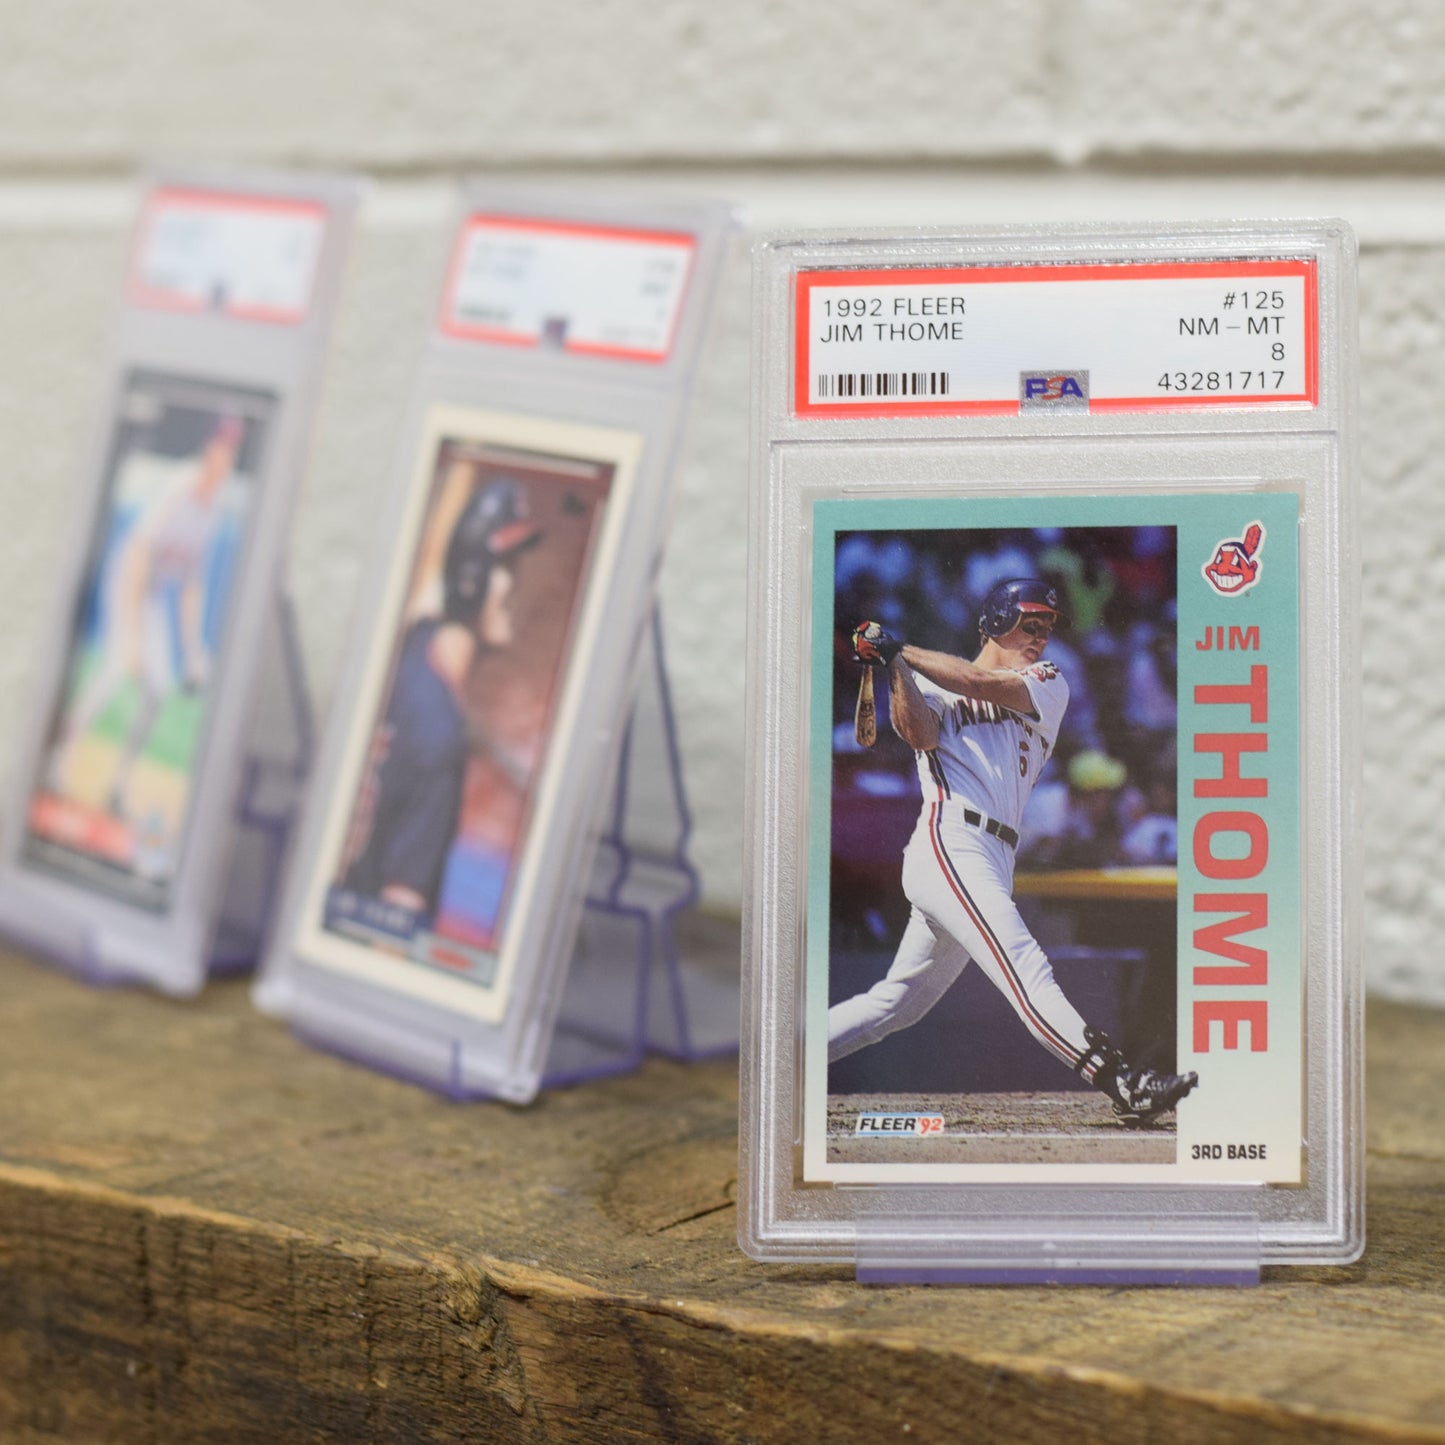 Graded PSA Trading and Sports Card Wall Mount & Shelf Stand